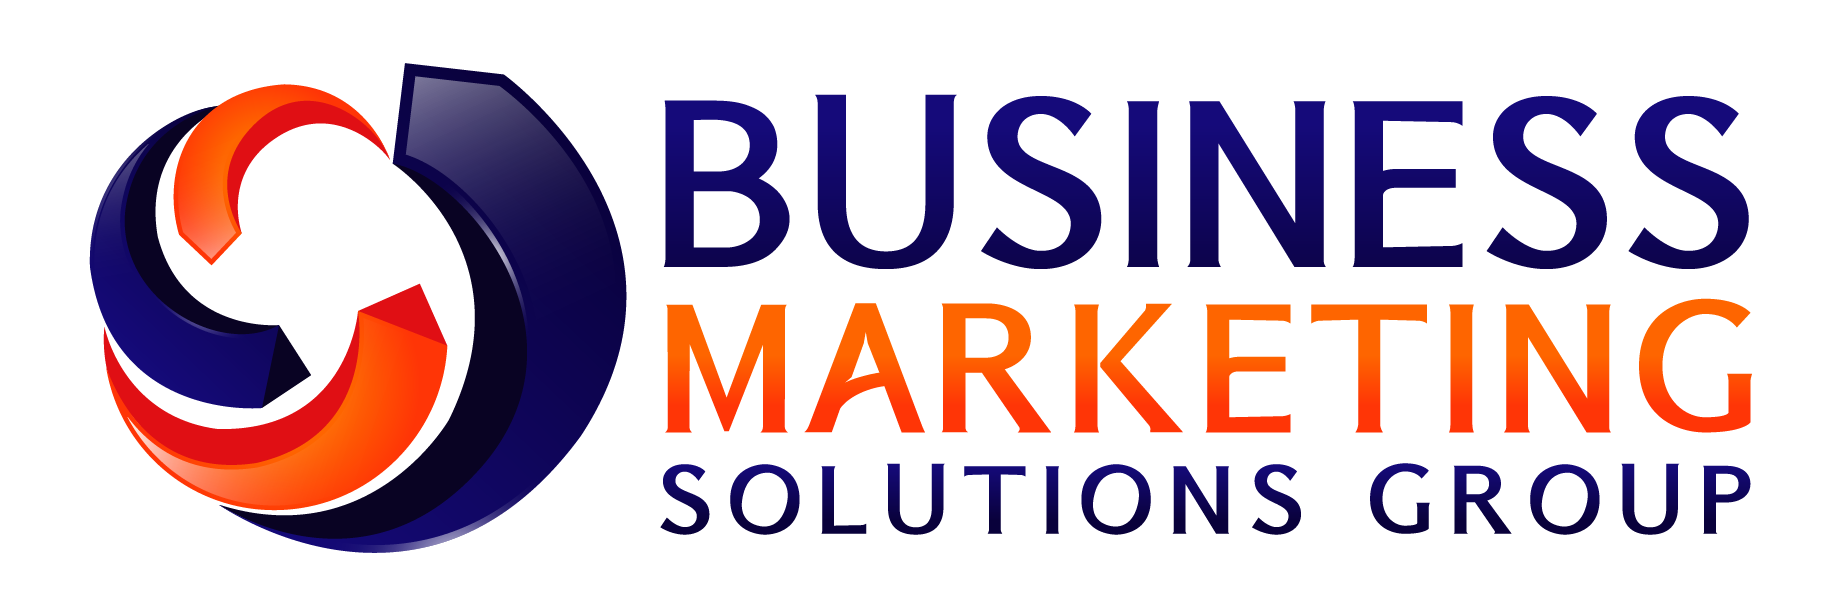 Business Marketing Solutions Group profile on Qualified.One